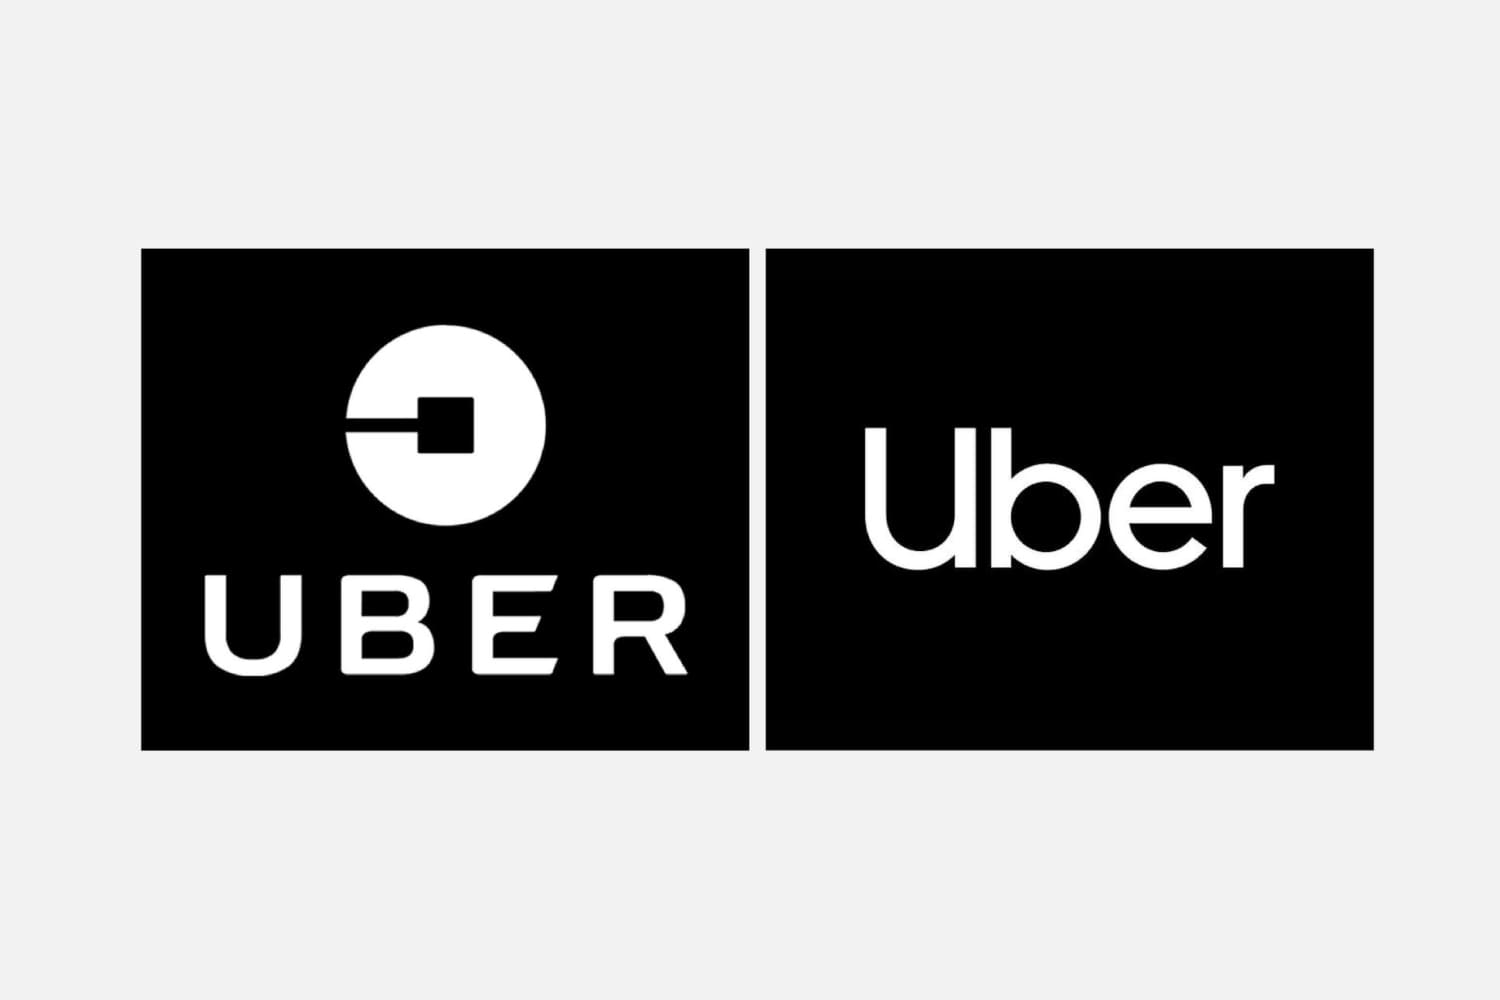 The word Uber in different fonts on a black background.